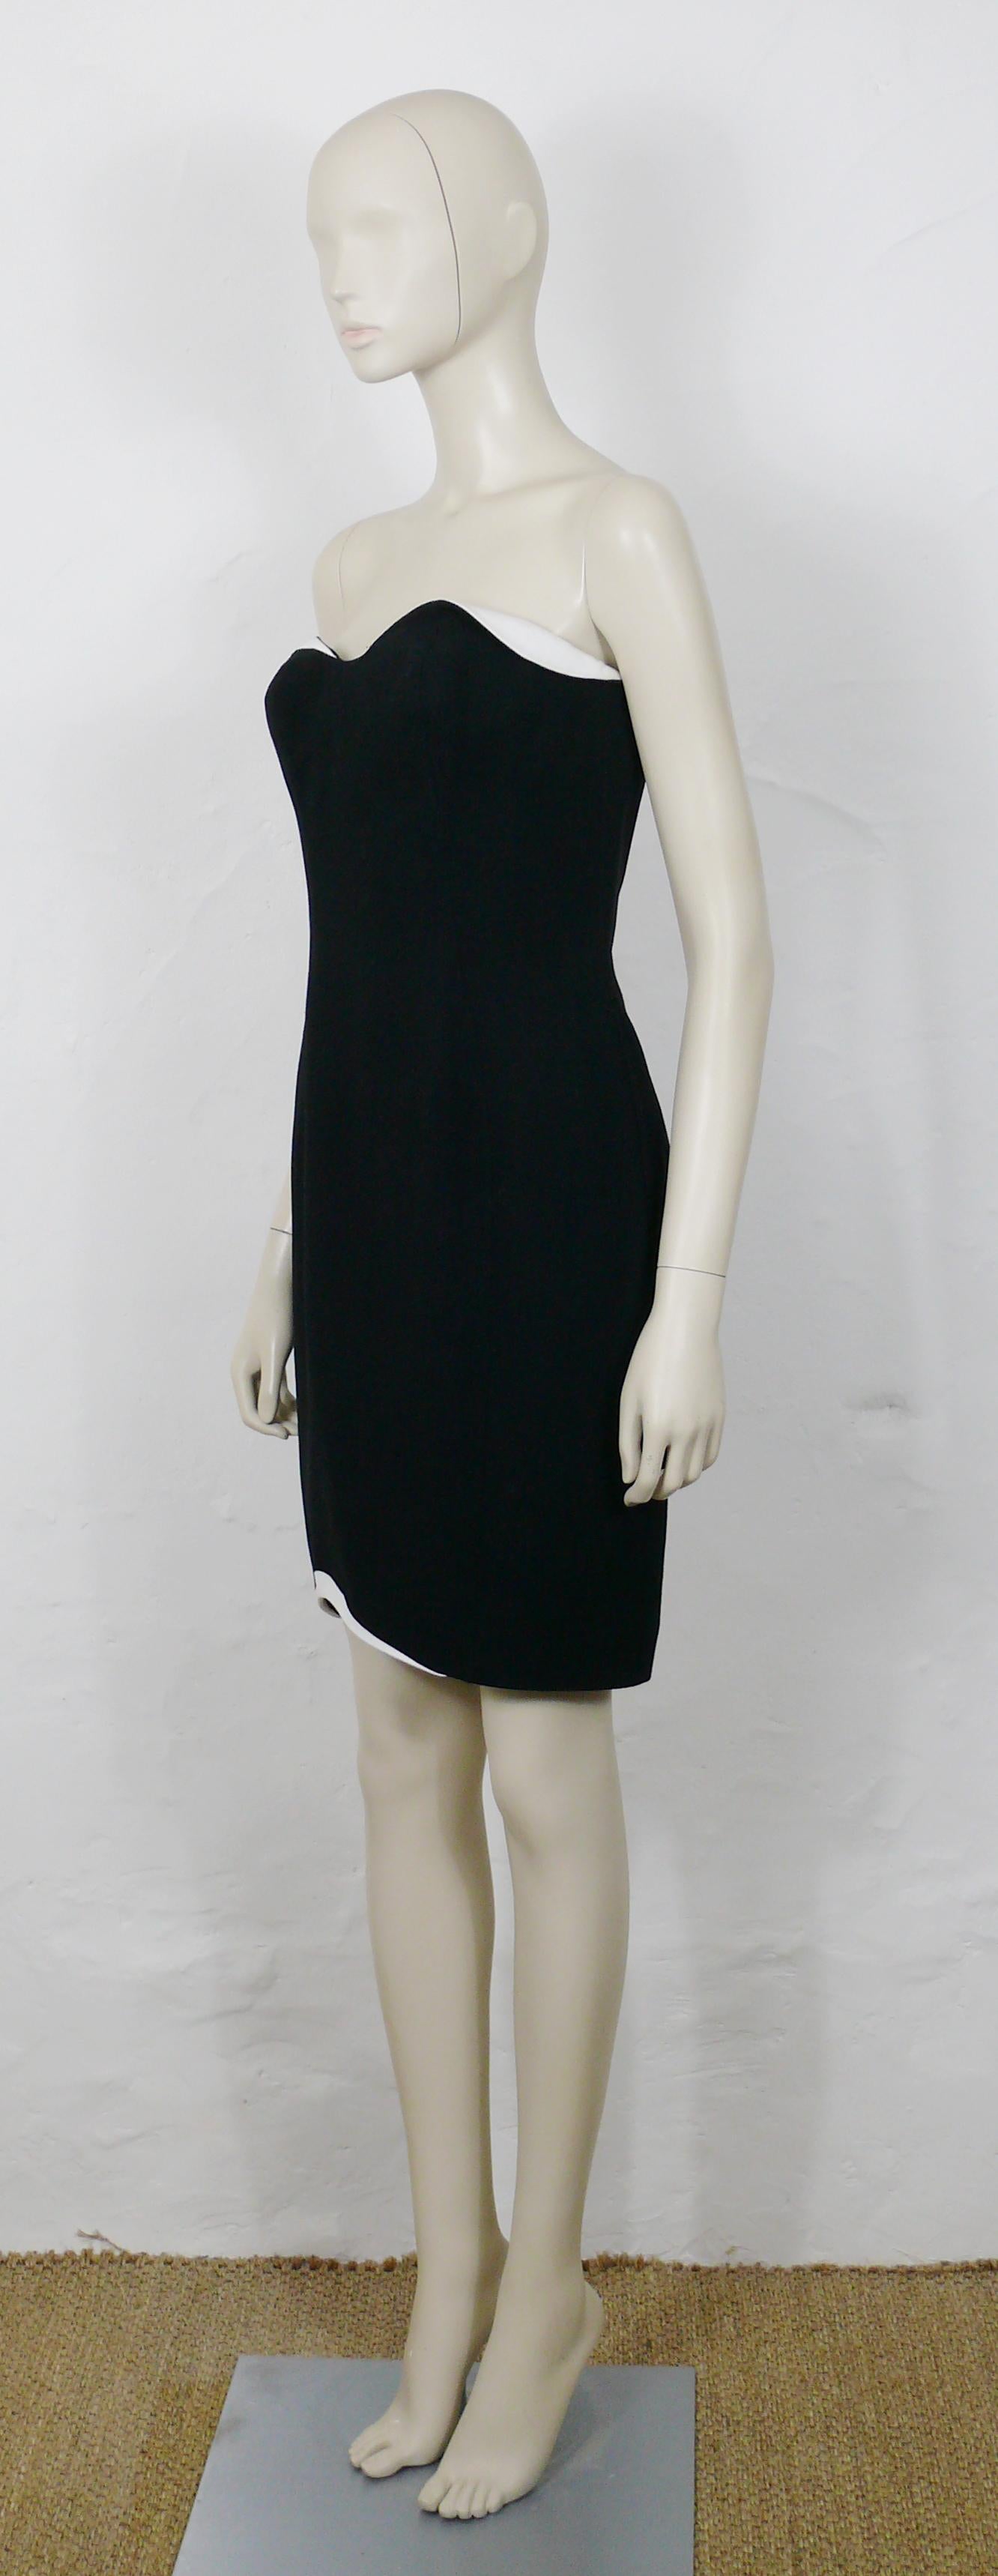 THIERRY MUGLER vintage black and white asymetric bustier dress.

This dress features :
- Black wool gabardine with asymetric white details on the bust line and the bottom edge.
- Structured bustier with boning.
- THIERRY MUGLER's typical sculptural